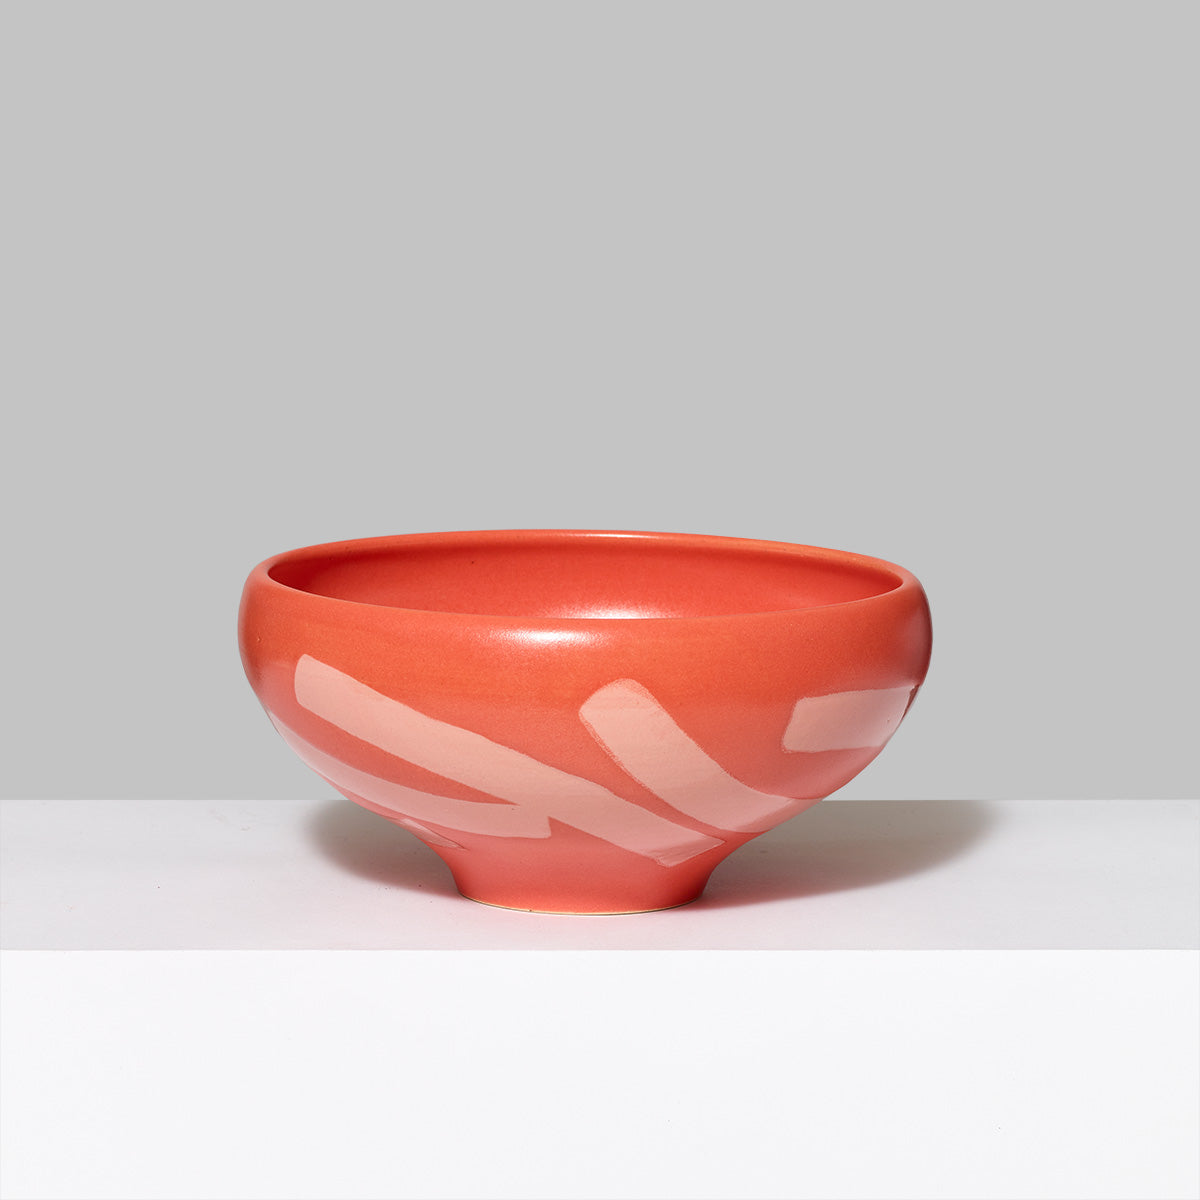 Handmade ceramic with glaze serving bowl in coral. Measures 6" Diameter x 3.25" Tall. 